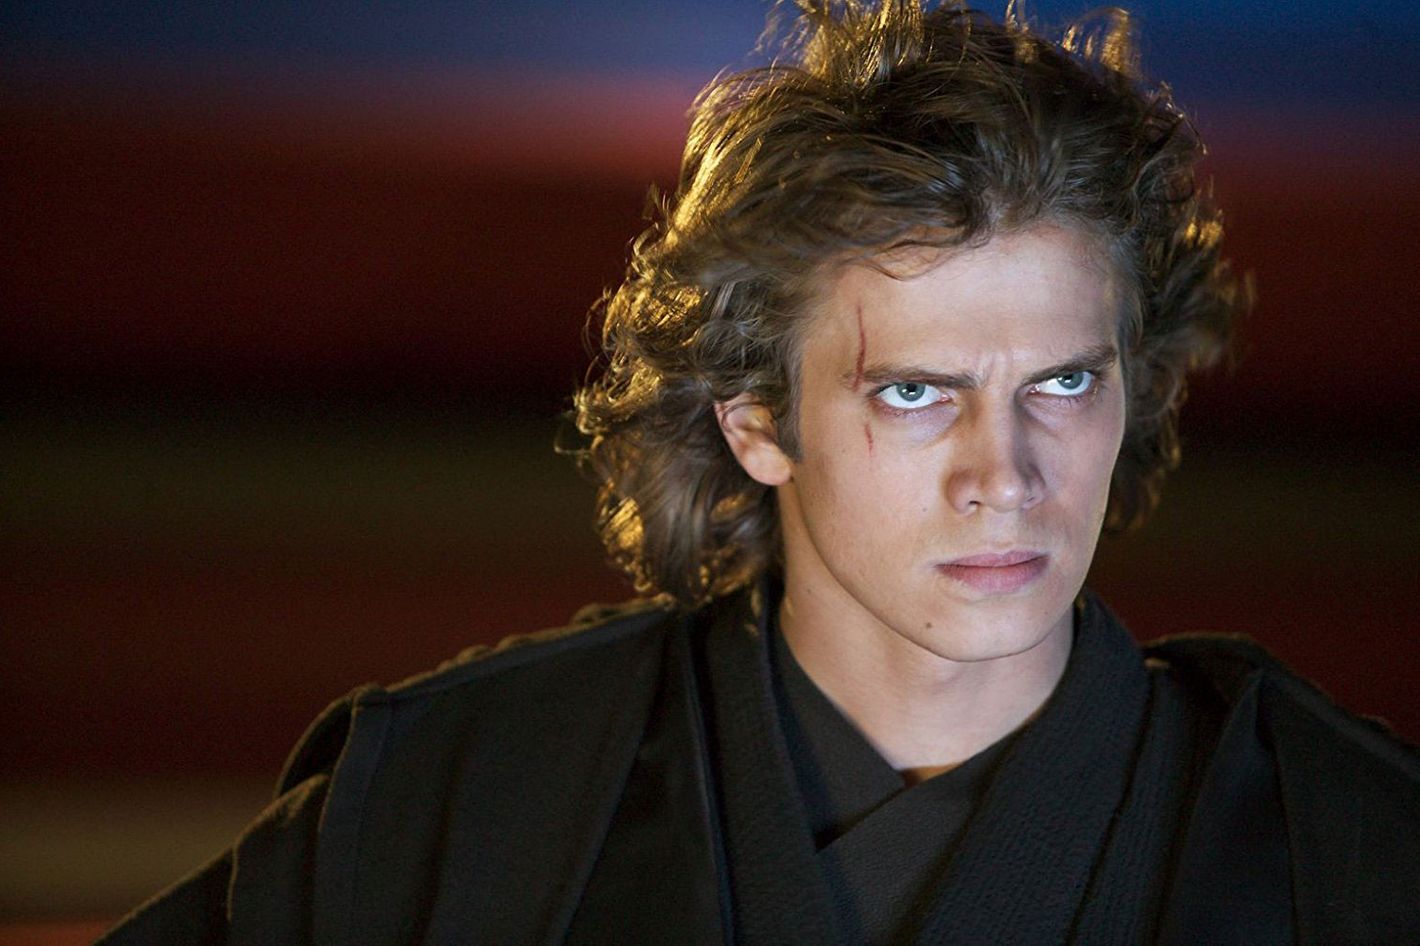 Who played Anakin Skywalker in the Star Wars prequel trilogy?